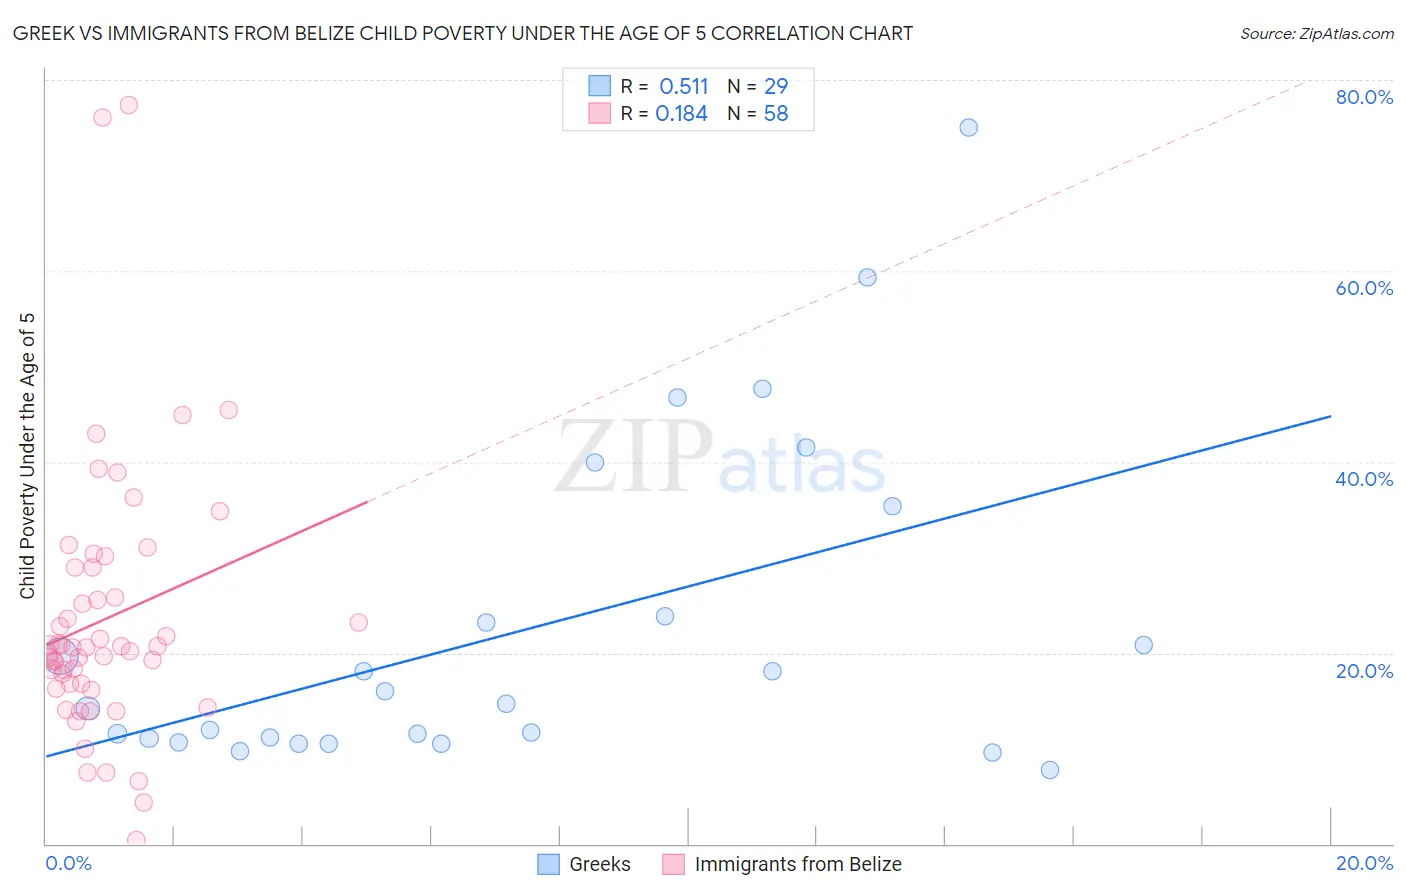 Greek vs Immigrants from Belize Child Poverty Under the Age of 5